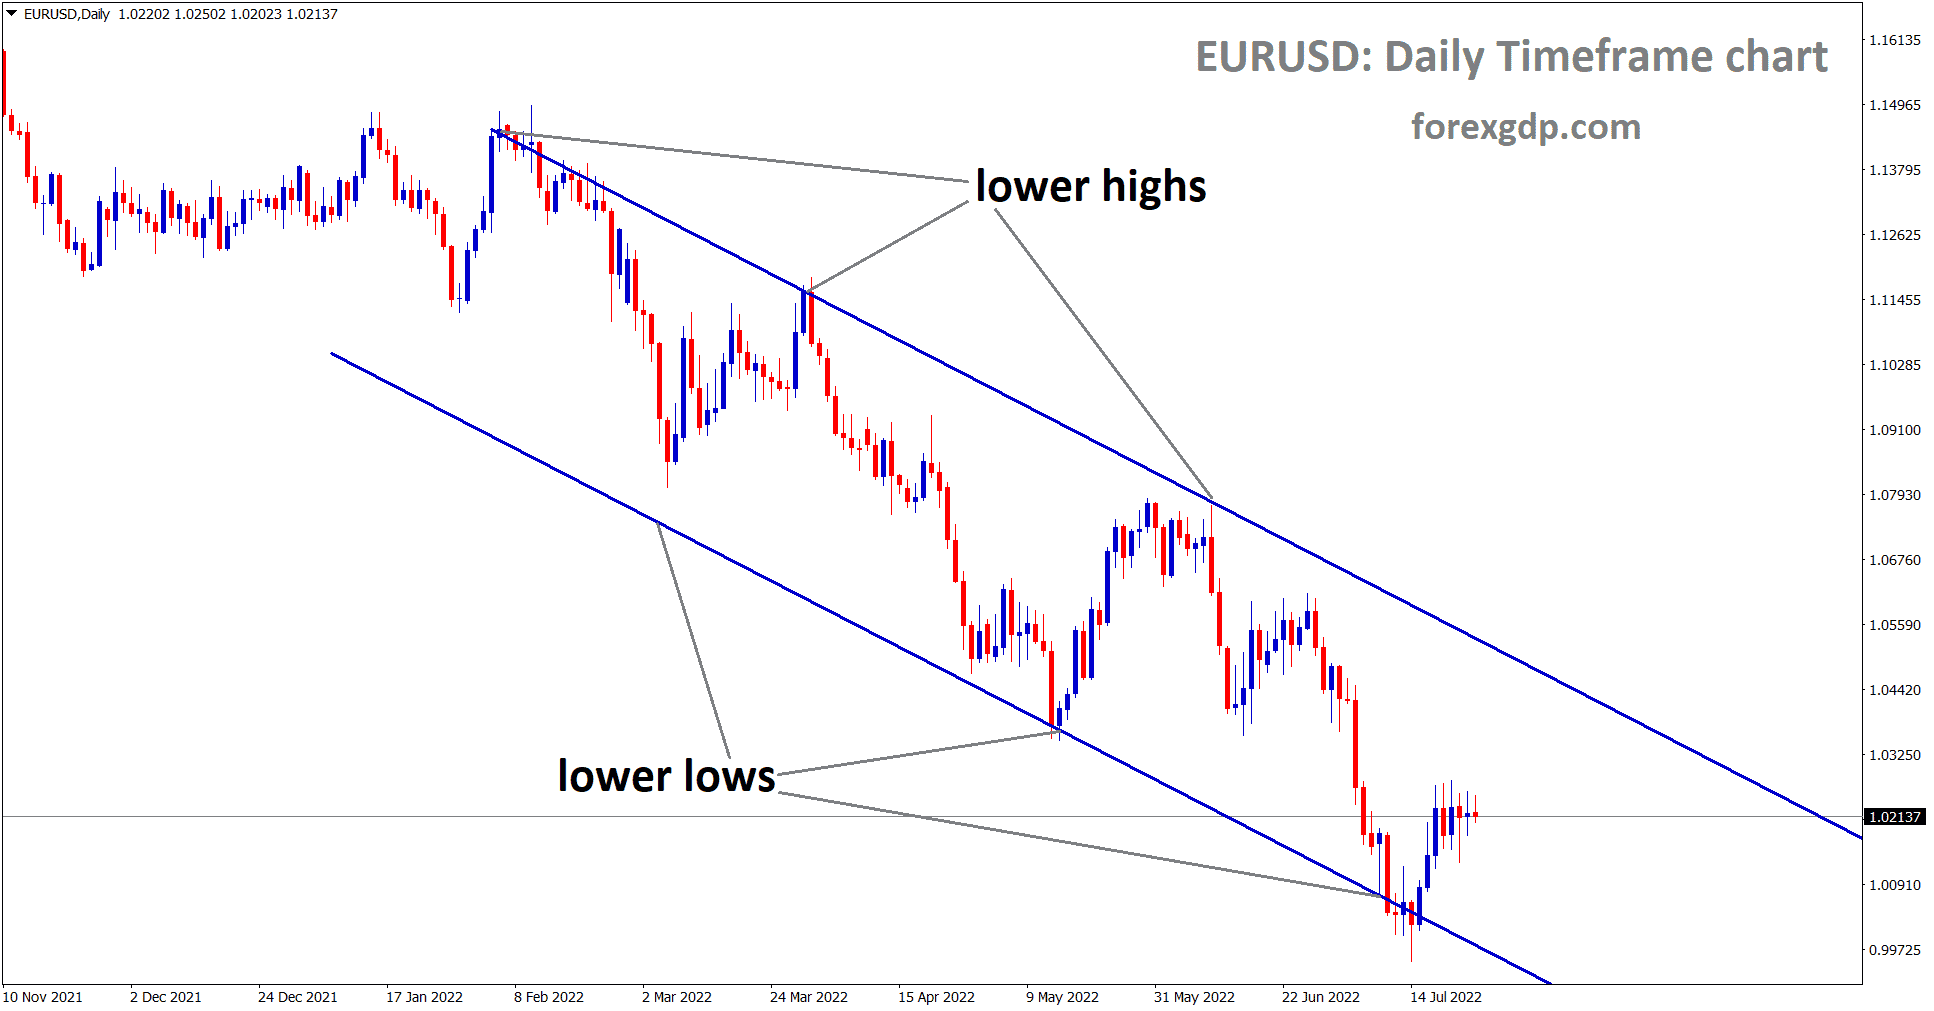 EURUSD Daily moving in descending channel and the market has rebounded from the lower low area of the channel.